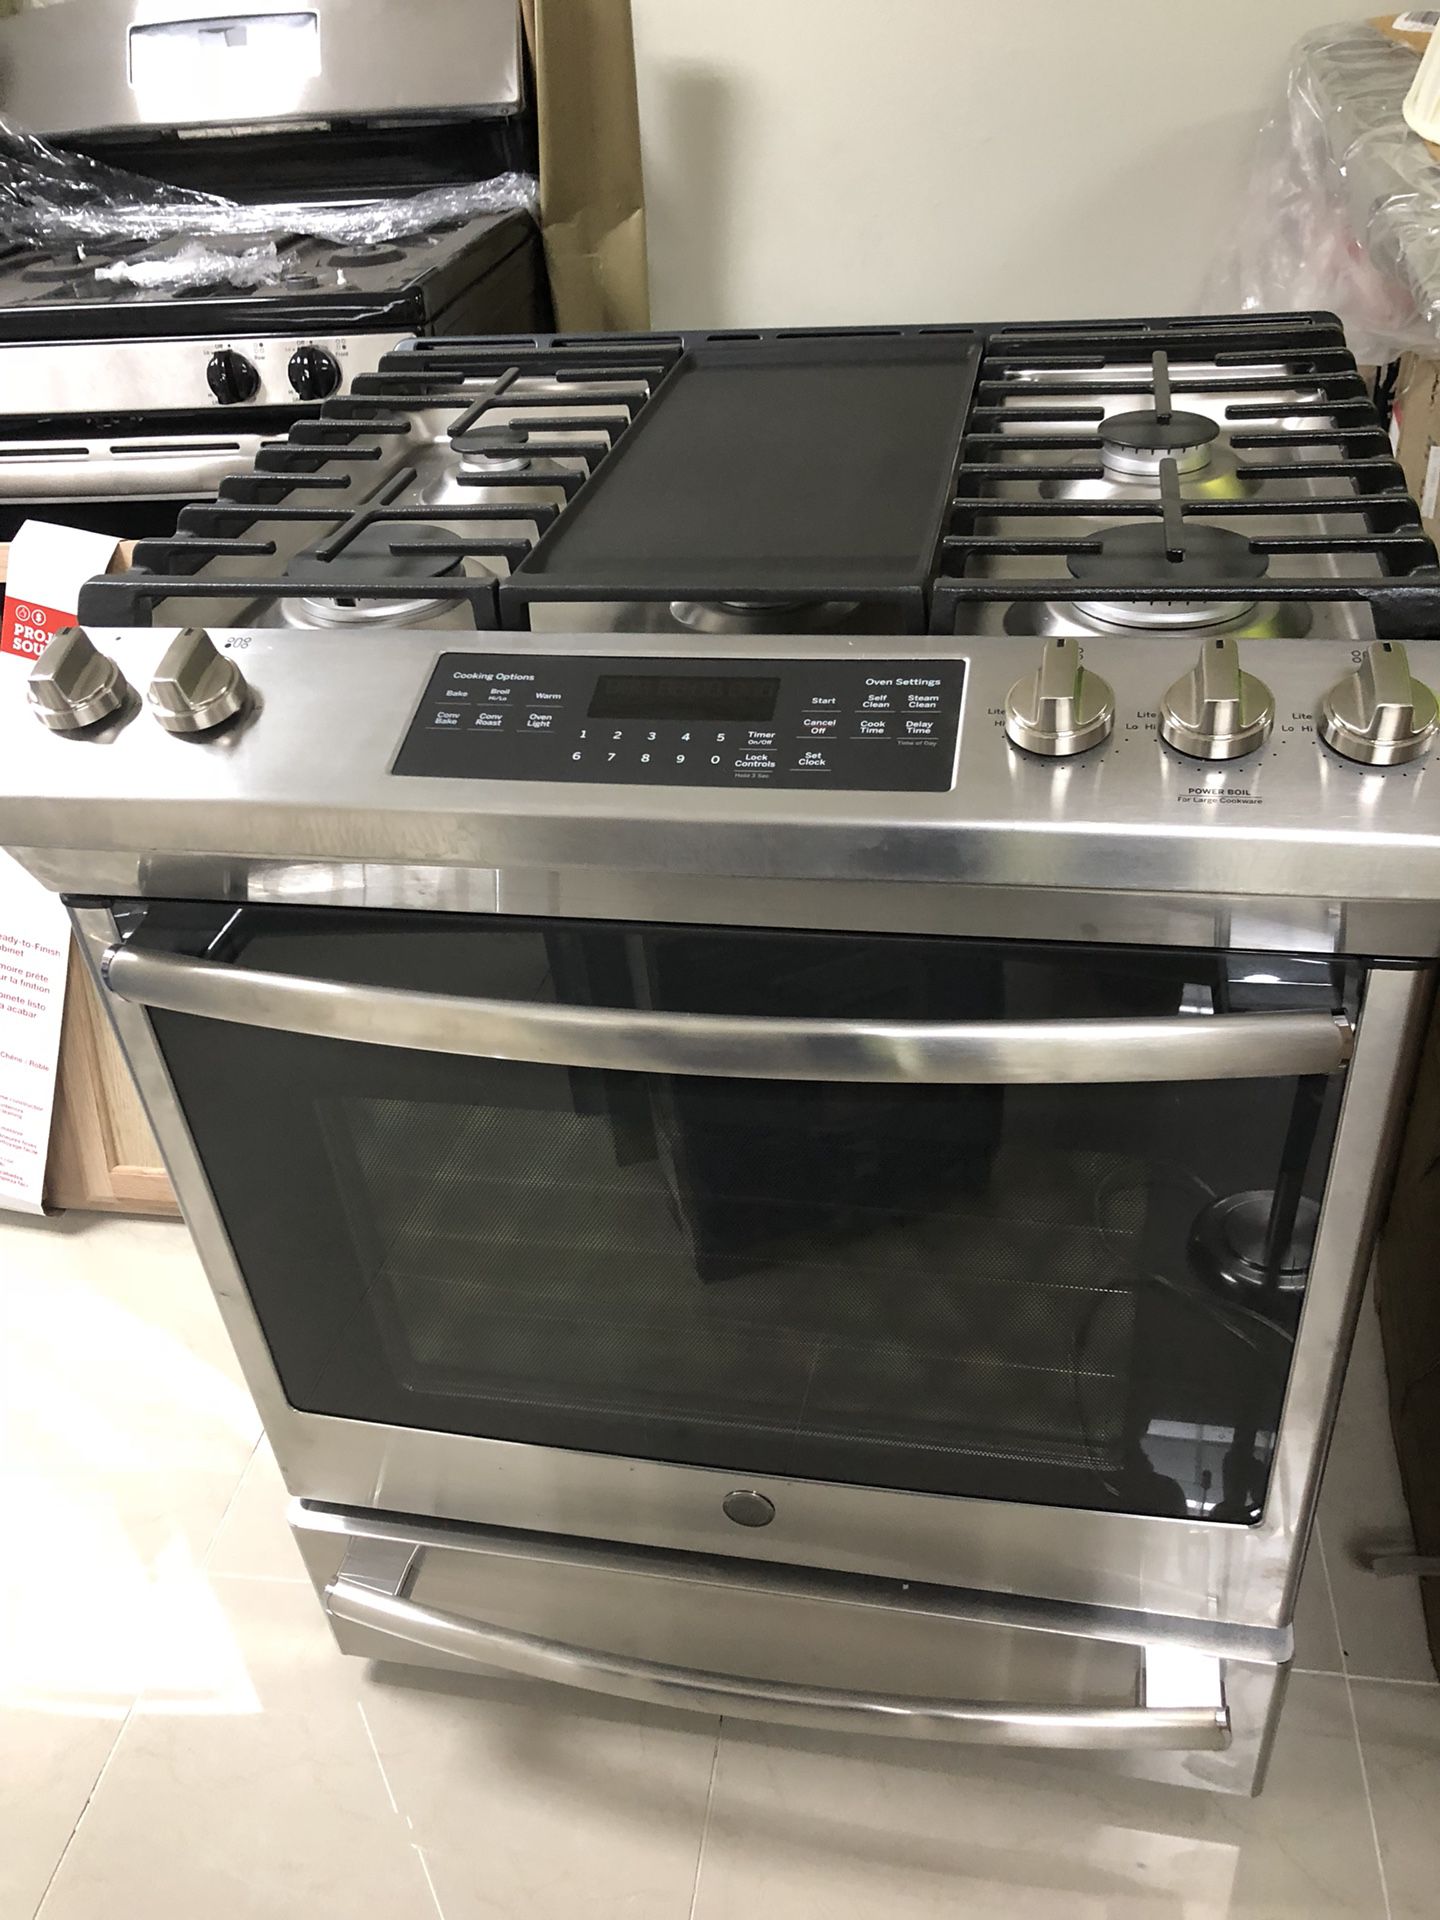 GE gas stove with convection oven